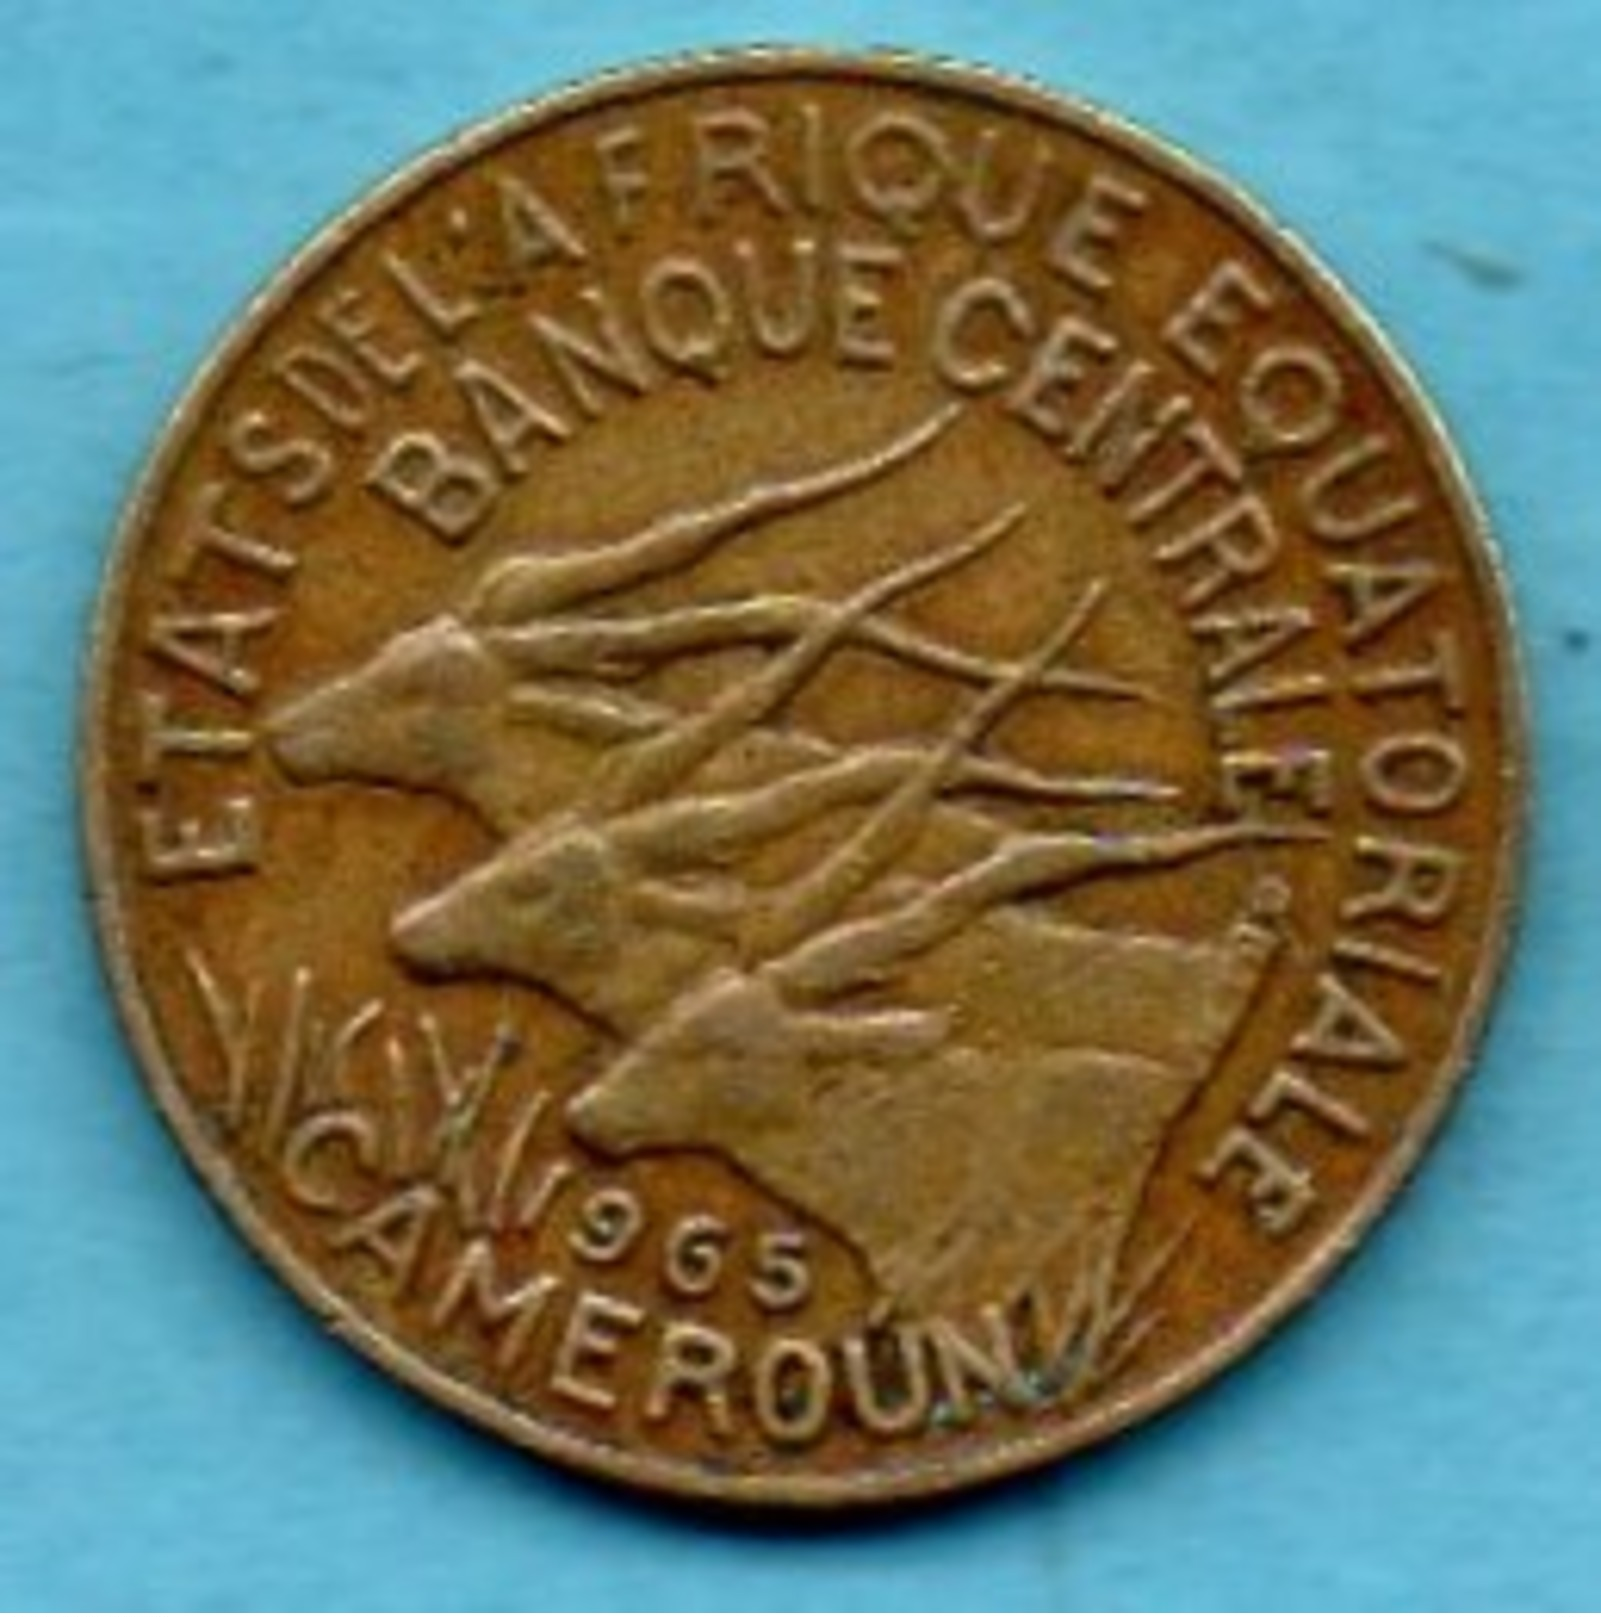 R3/  EQUATORIAL AFRICAN STATES  5 Francs 1965 CAMEROUN  Km#1a - Central African Republic